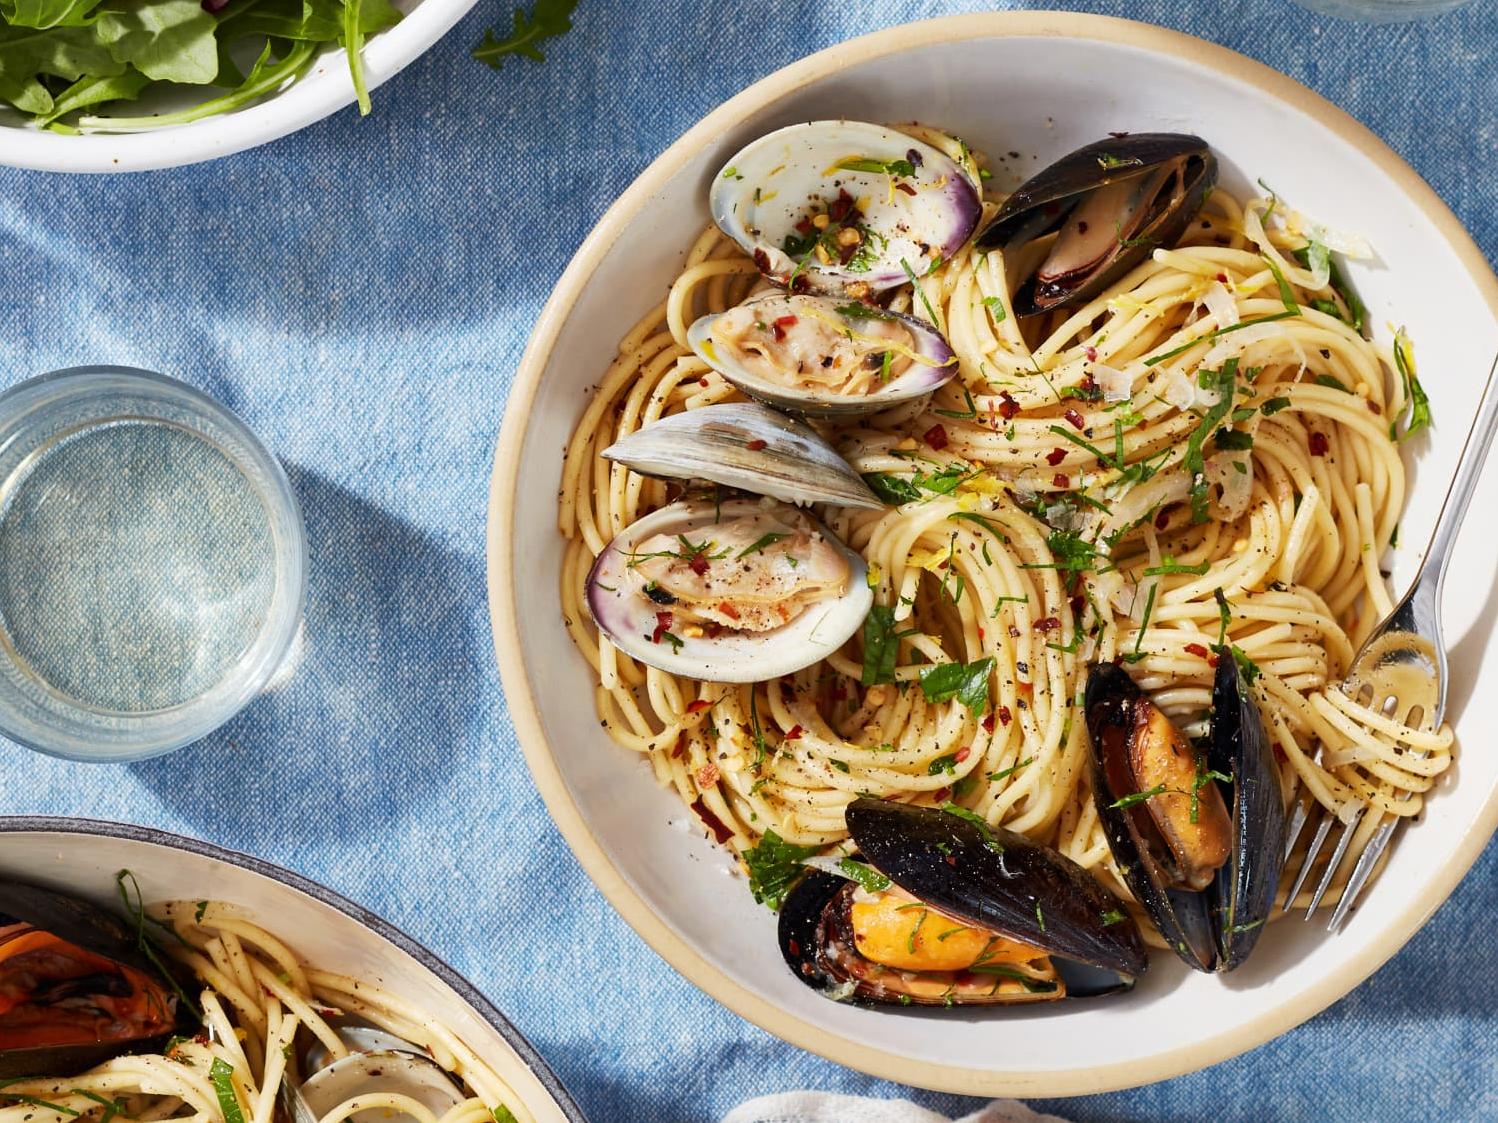 Spaghetti With White Wine and Mussel Sauce